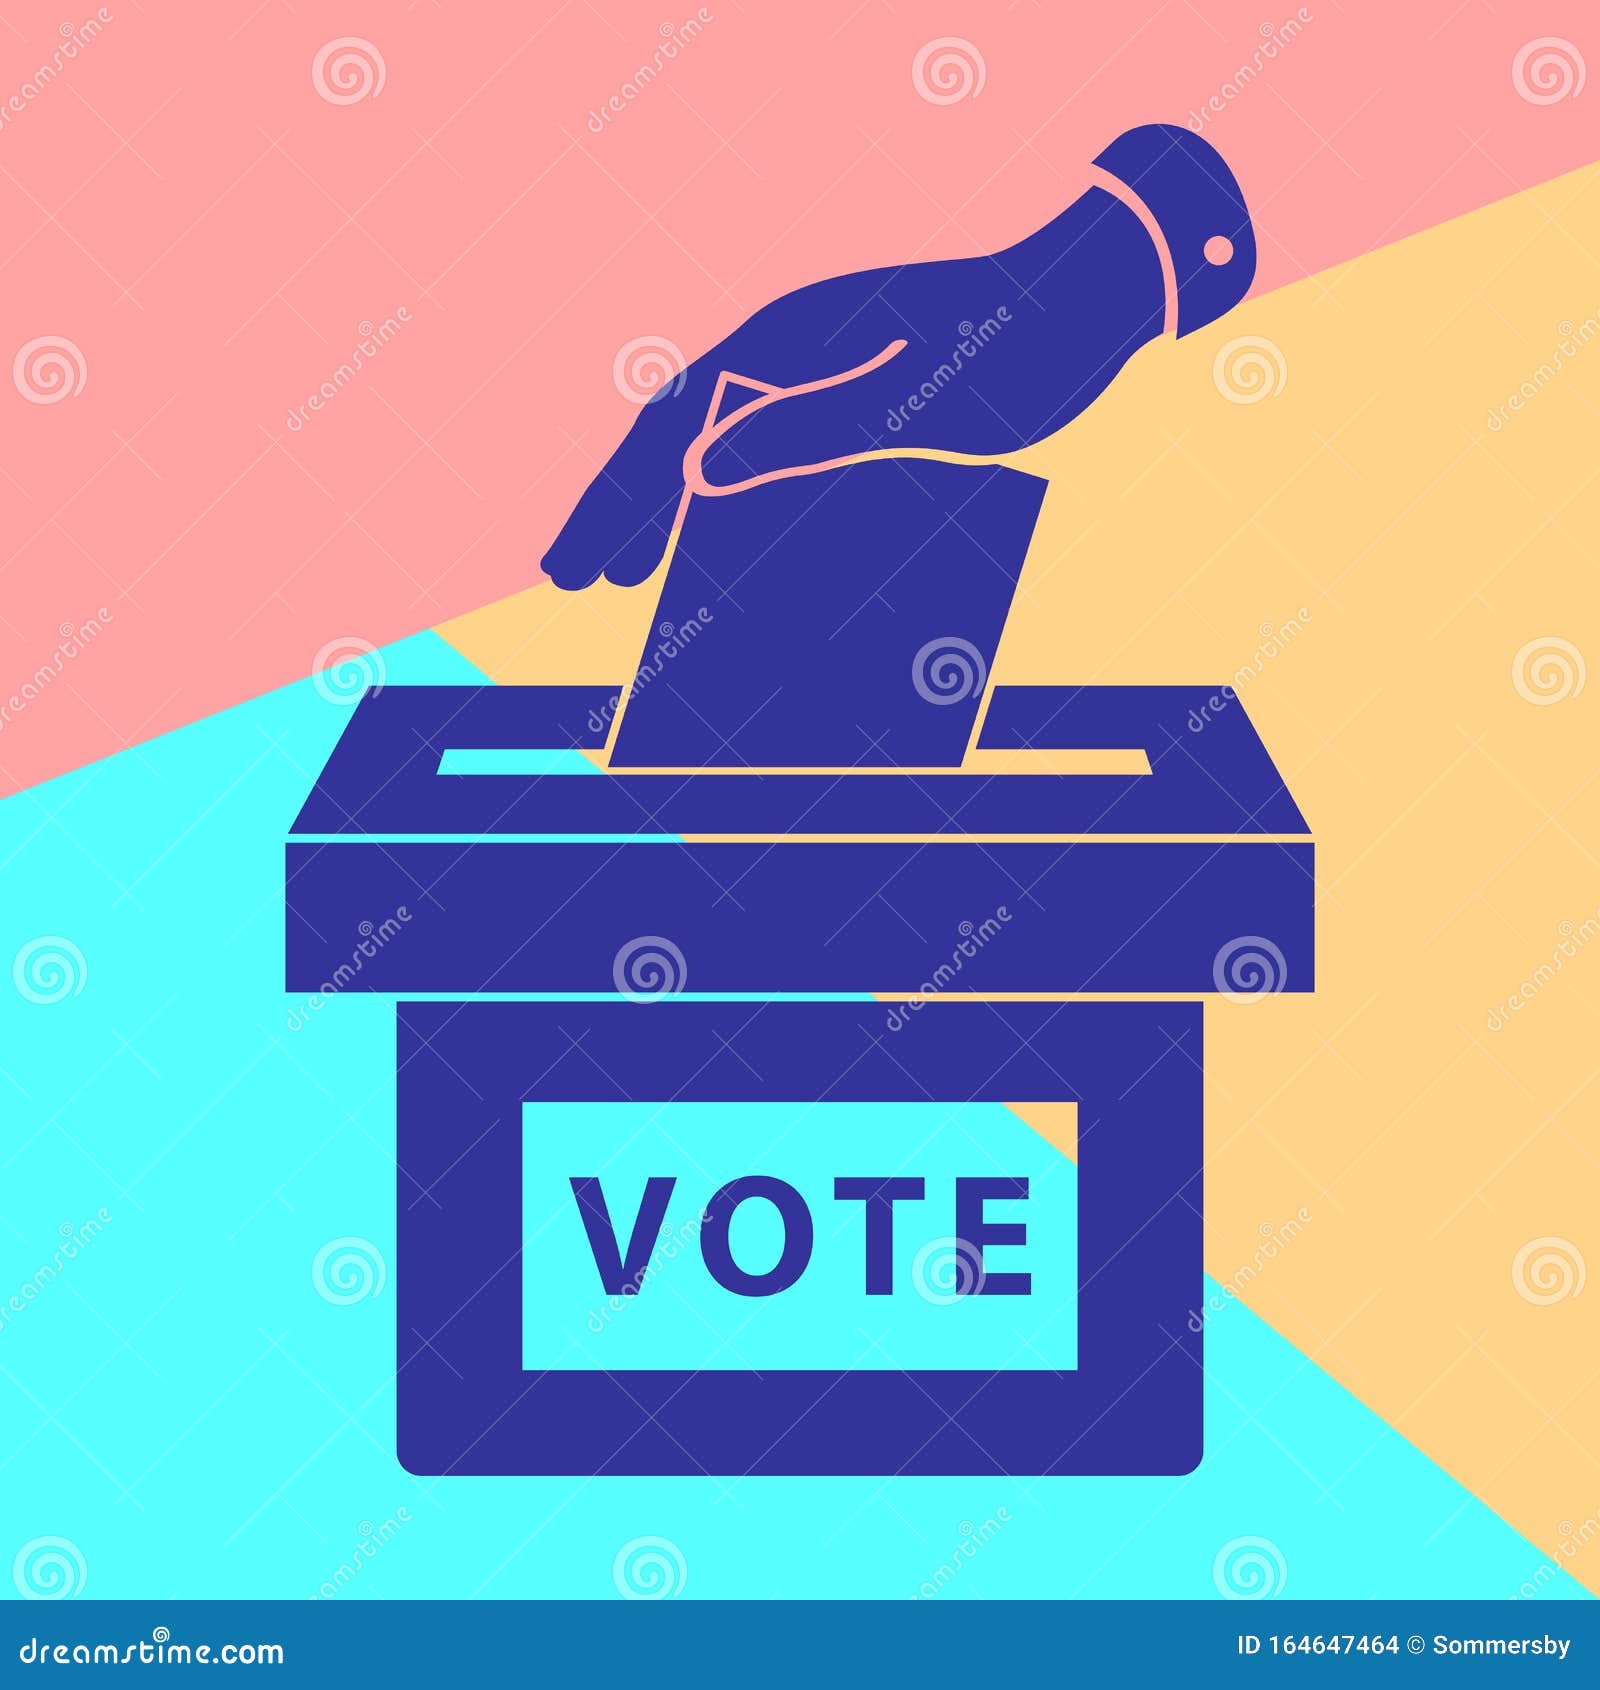 flat hand putting vote bulletin into ballot box icon. election concept